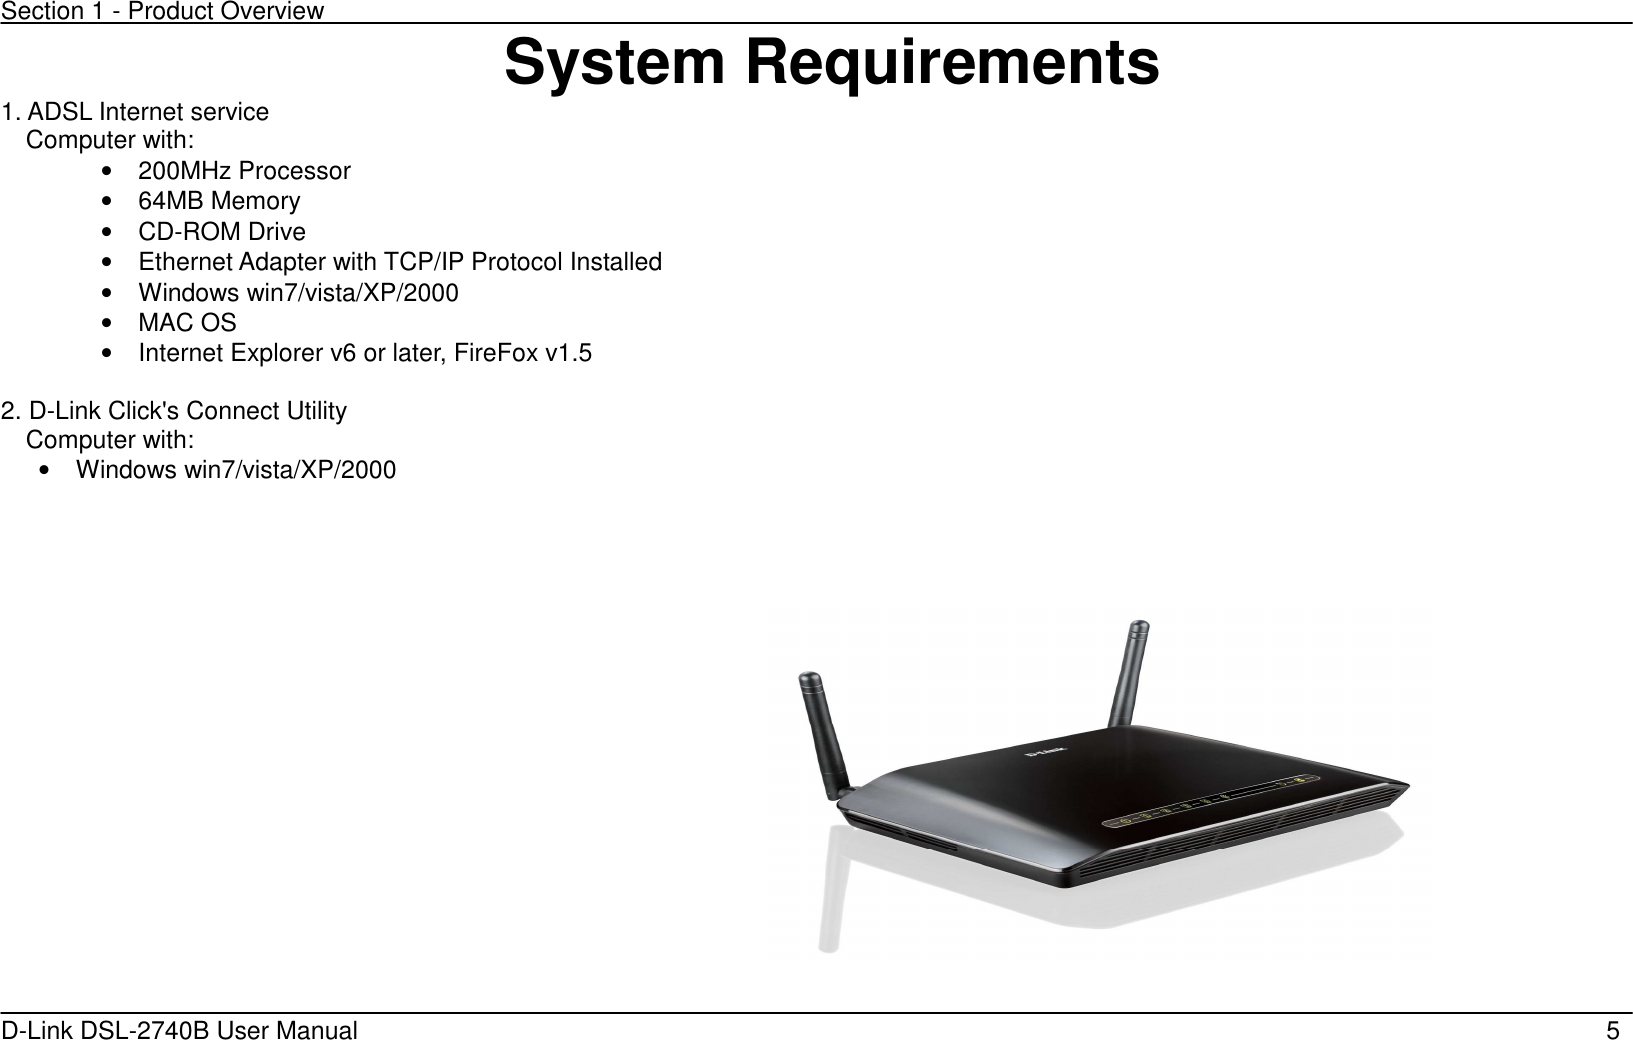 Section 1 - Product Overview D-Link DSL-2740B User Manual                                                  5System Requirements 1. ADSL Internet service Computer with: •  200MHz Processor •  64MB Memory •  CD-ROM Drive •  Ethernet Adapter with TCP/IP Protocol Installed •  Windows win7/vista/XP/2000 •  MAC OS •  Internet Explorer v6 or later, FireFox v1.5  2. D-Link Click&apos;s Connect Utility Computer with: •  Windows win7/vista/XP/2000     